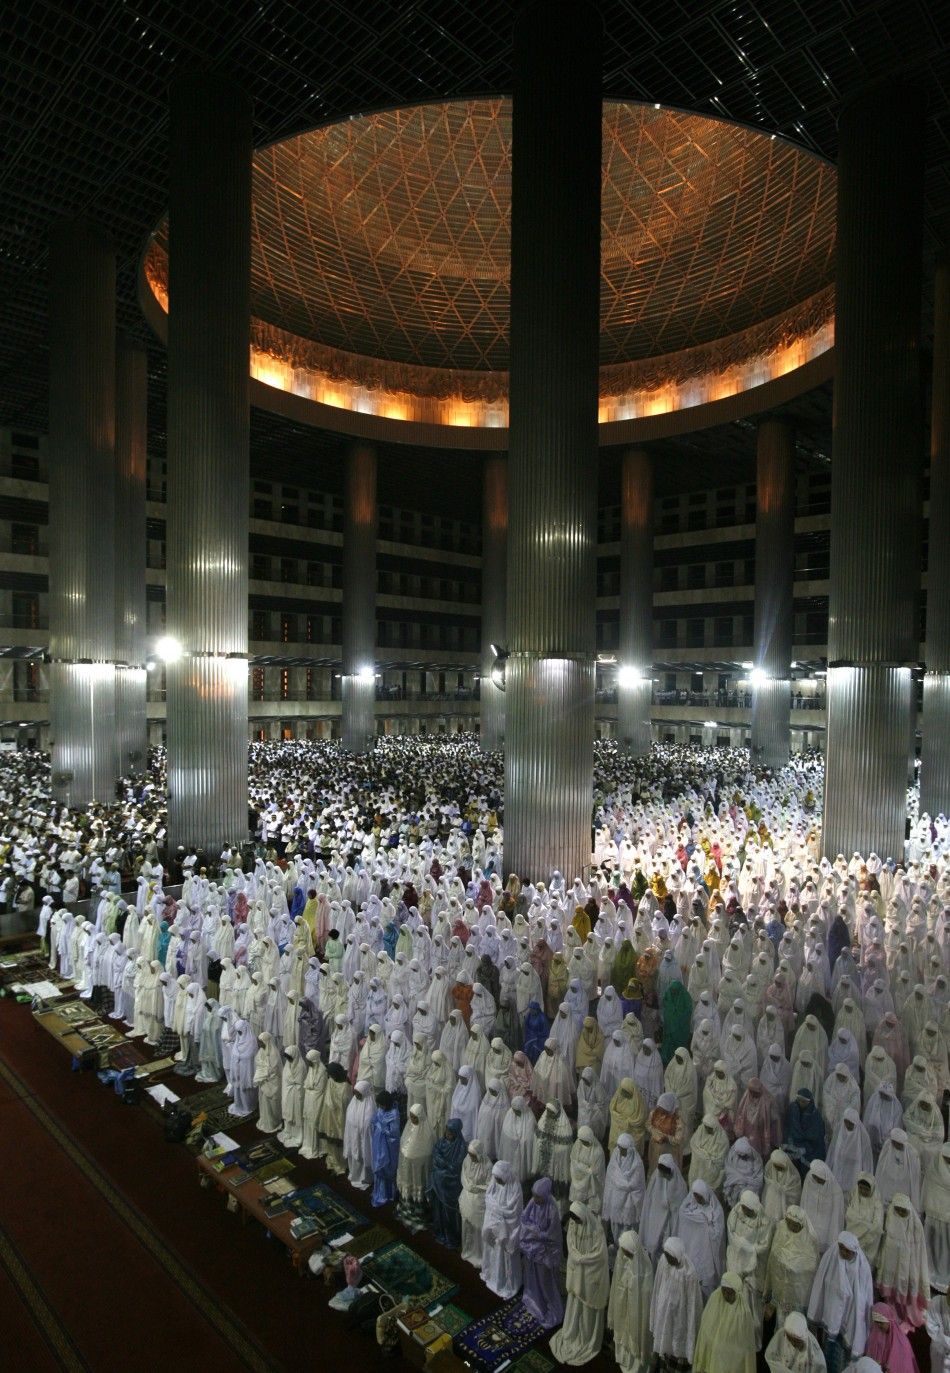 Muslims attend mass prayer session quotTarawihquot, which marks the beginning of the holy fasting month of Ramadan, at Istiqlal mosque in Jakarta